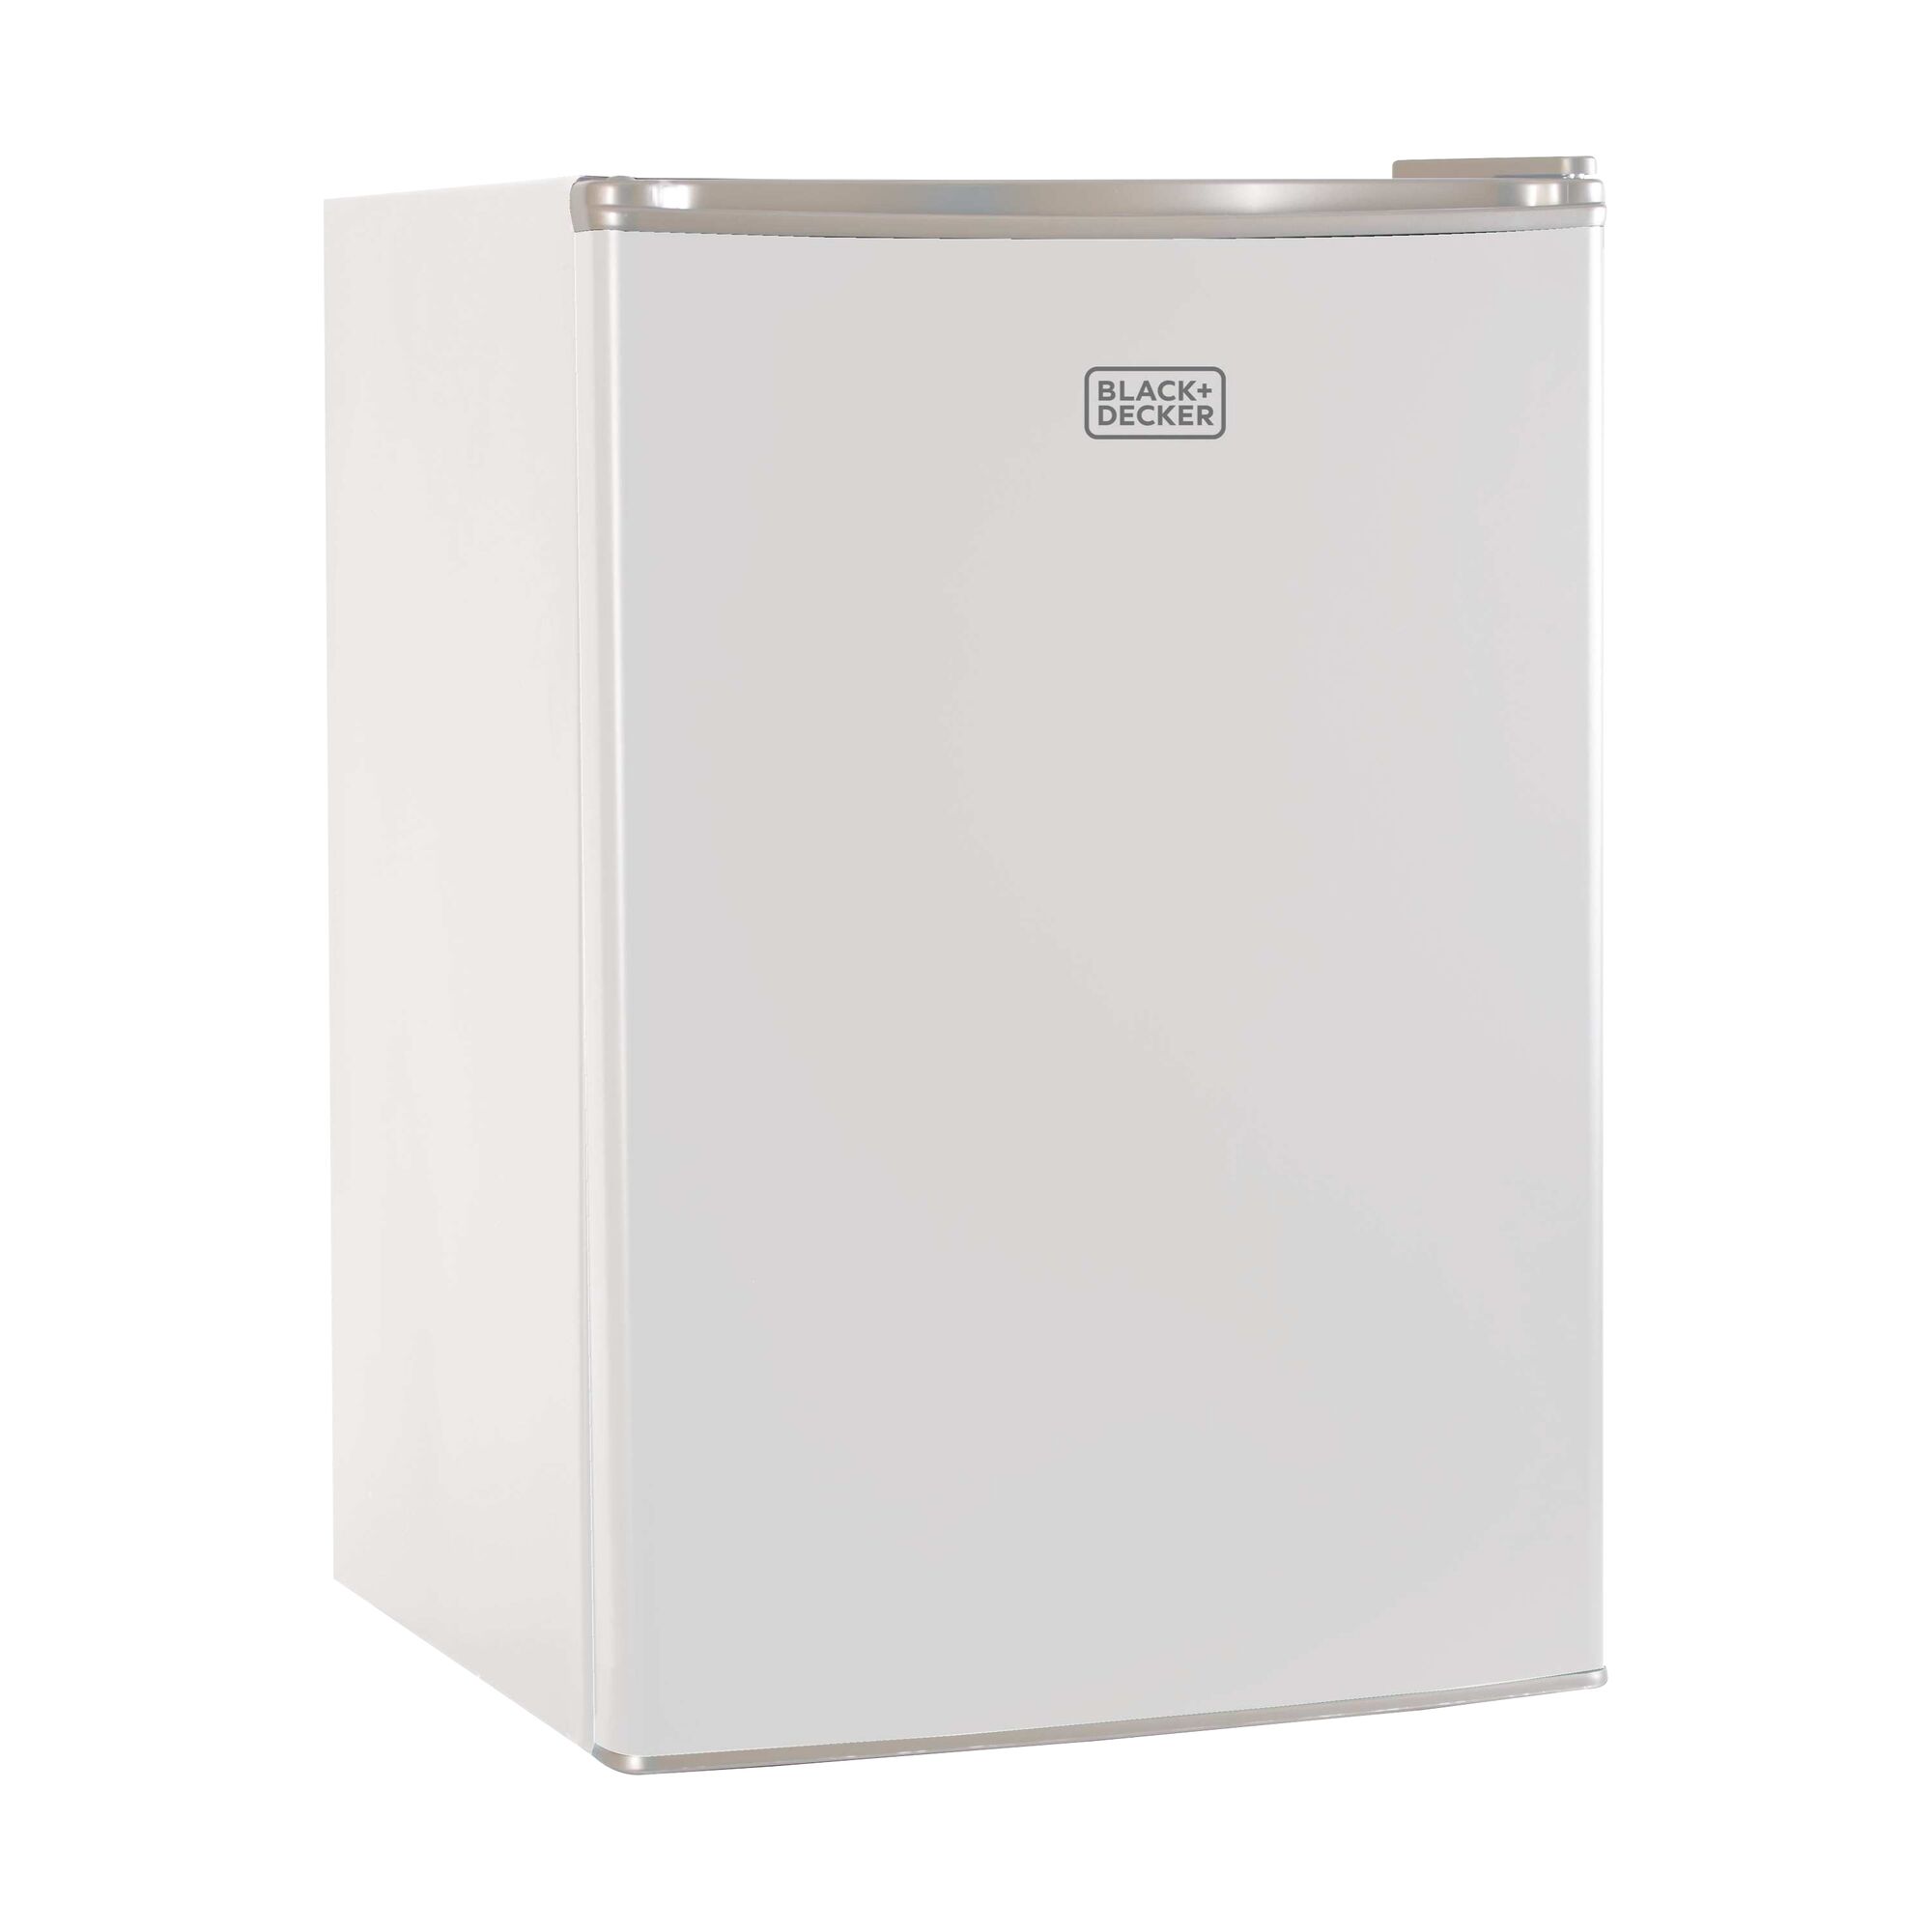 2.5 Cubic foot Energy Star Refrigerator with Freezer.